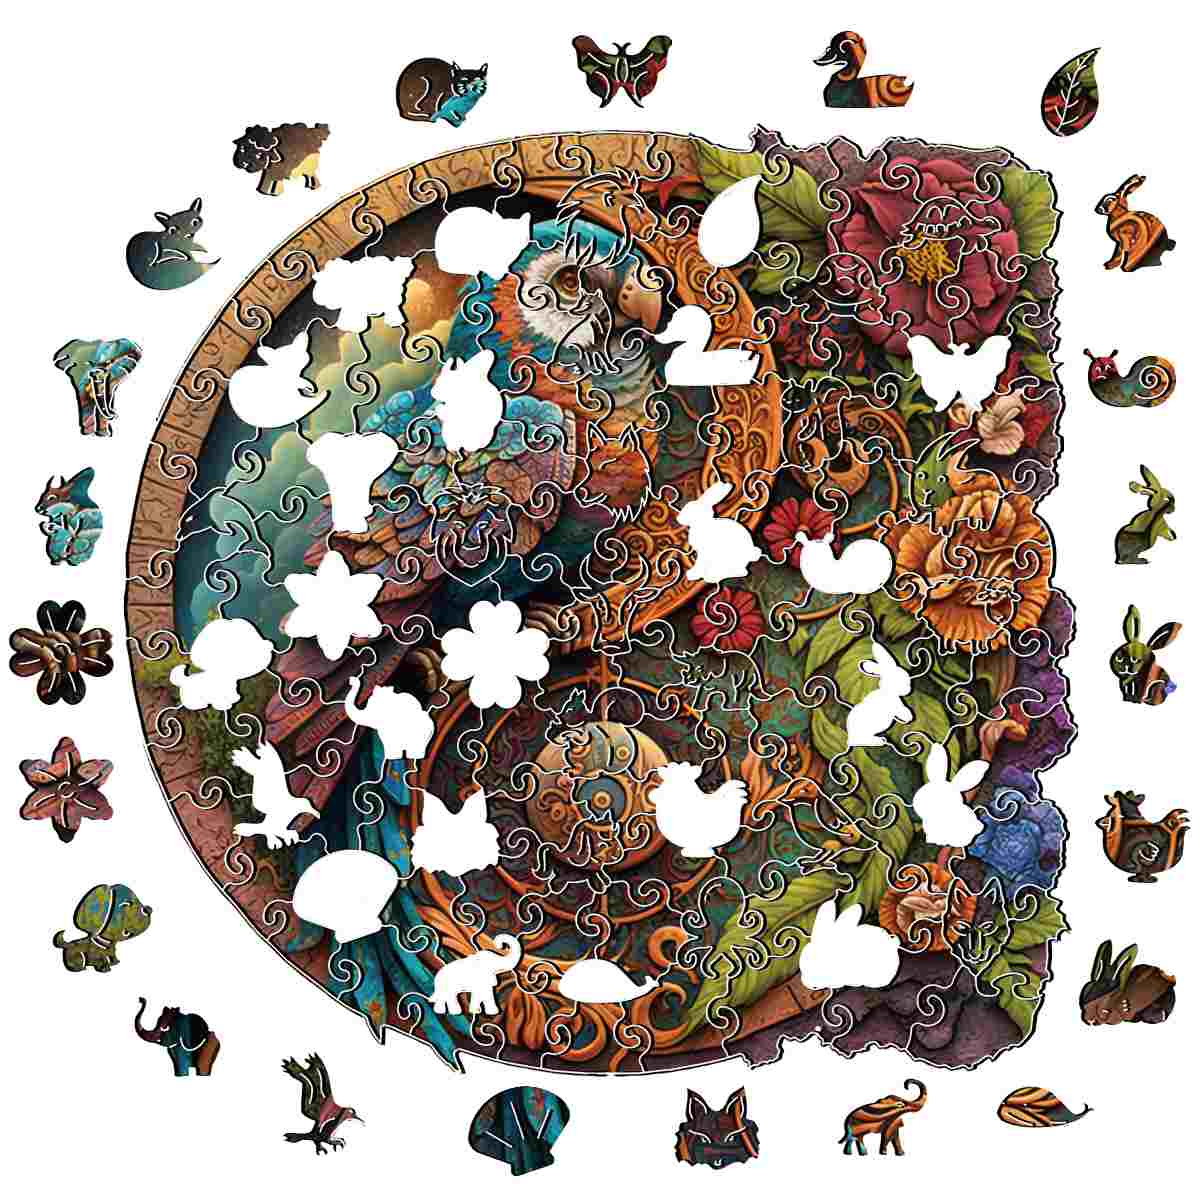 Animal Jigsaw Puzzle > Wooden Jigsaw Puzzle > Jigsaw Puzzle Parrot Yin Yang - Jigsaw Puzzle